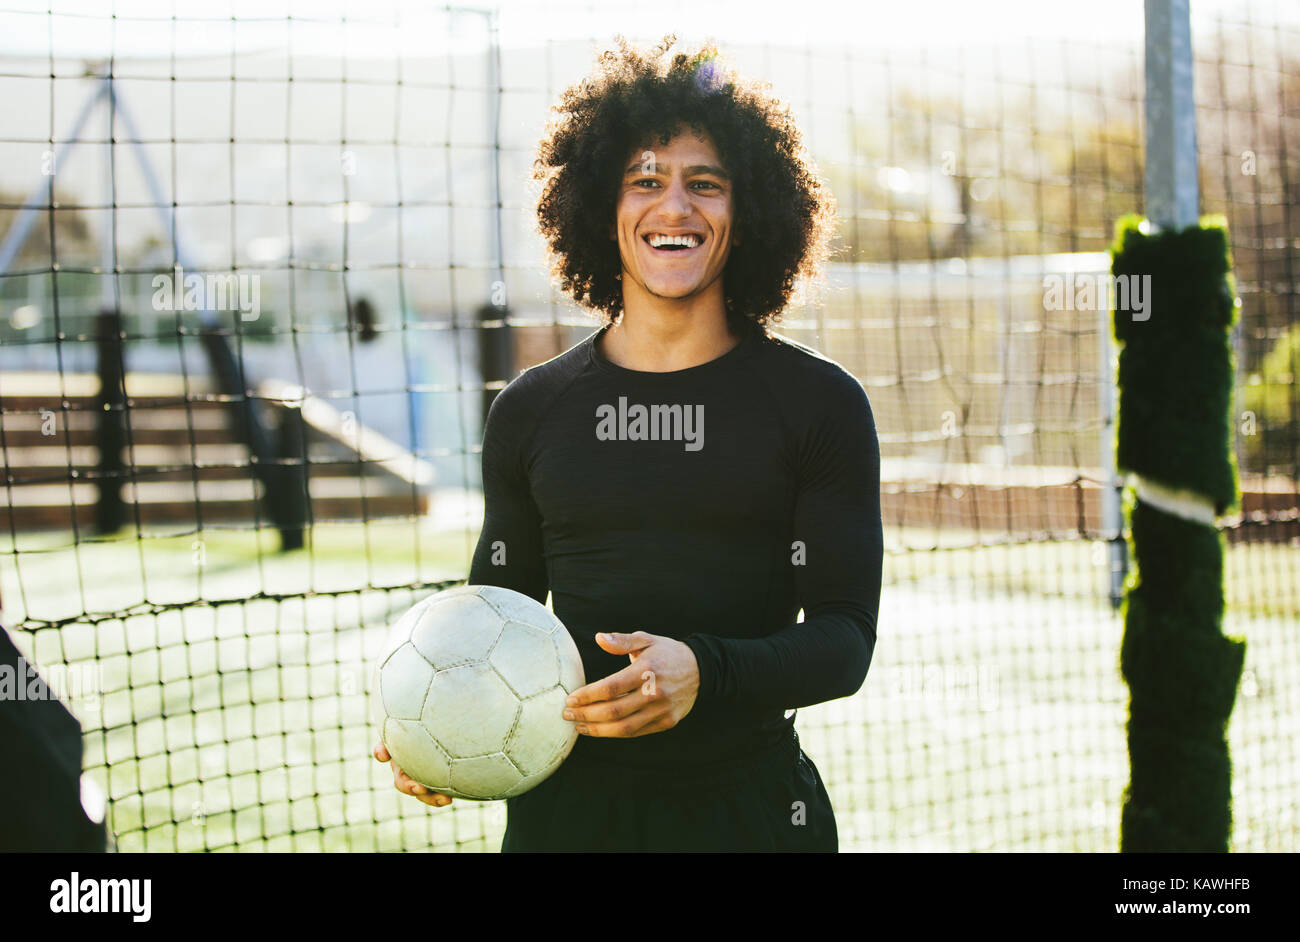 Portrait of teenage football player holding a ball in his hand and laughing. Young man training on soccer field. Stock Photo